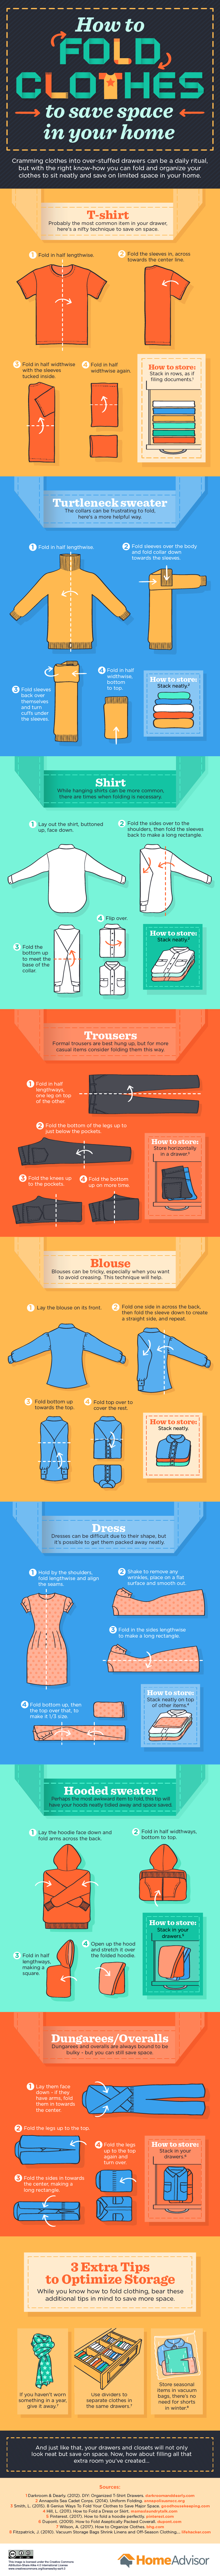 How-to-fold-clothes-to-save-space